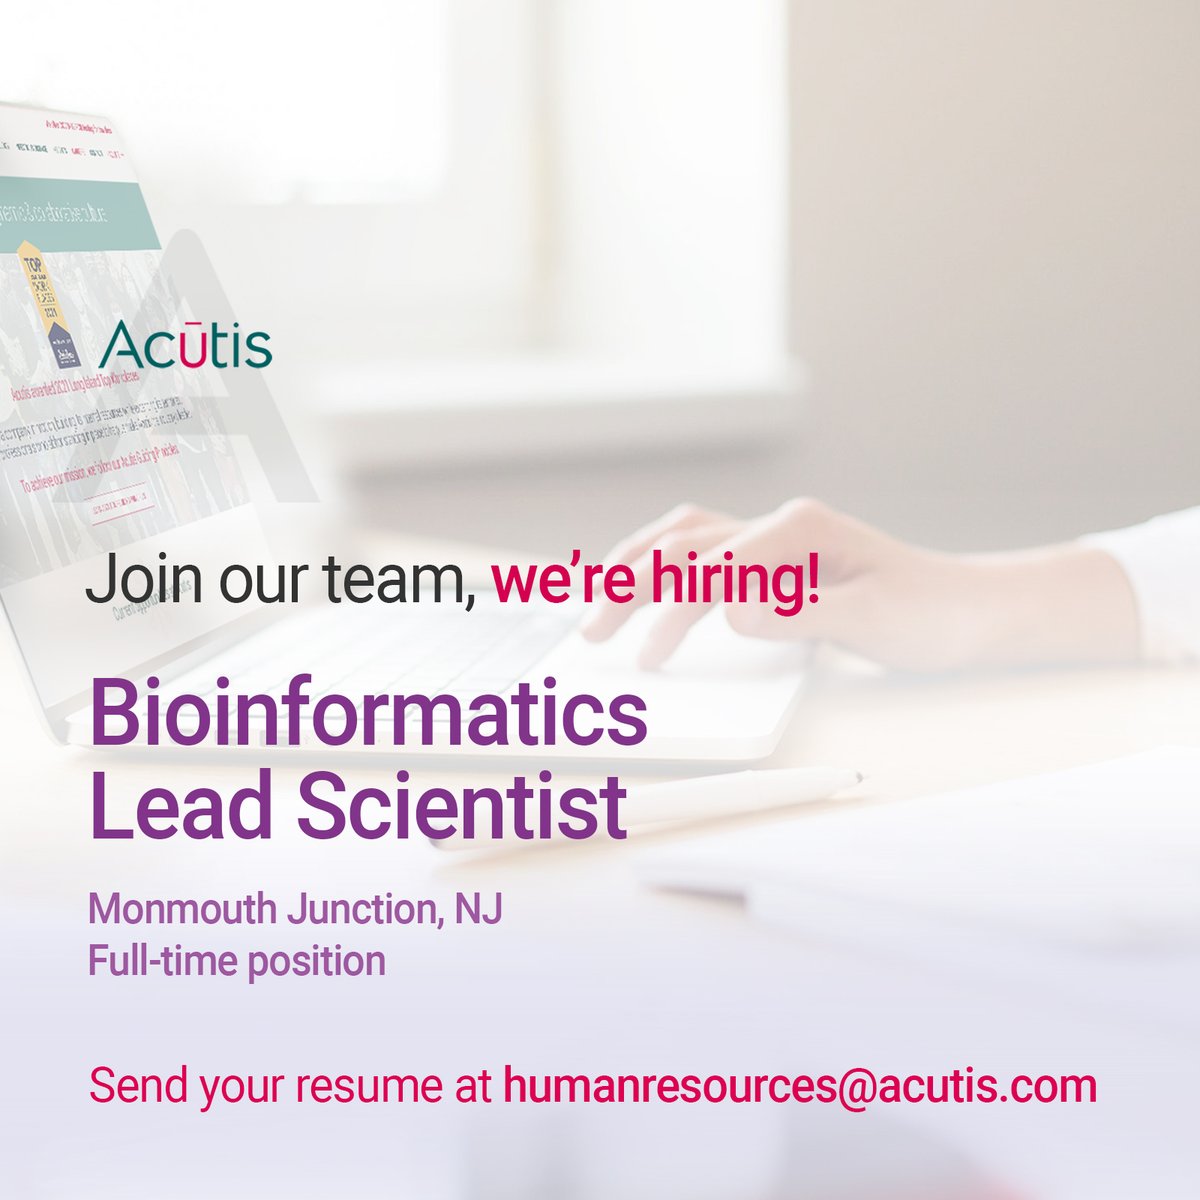 The #Bioinformatics Lead Scientist will demonstrate capabilities in #scientificprogramming, #relationaldatasystems, #algorithmsdevelopment, and #statisticalmodeling and deploy bioinformatics code within a clinical setting. >> hubs.ly/Q01C9ggK0
#newjersey #clinicallaboratory